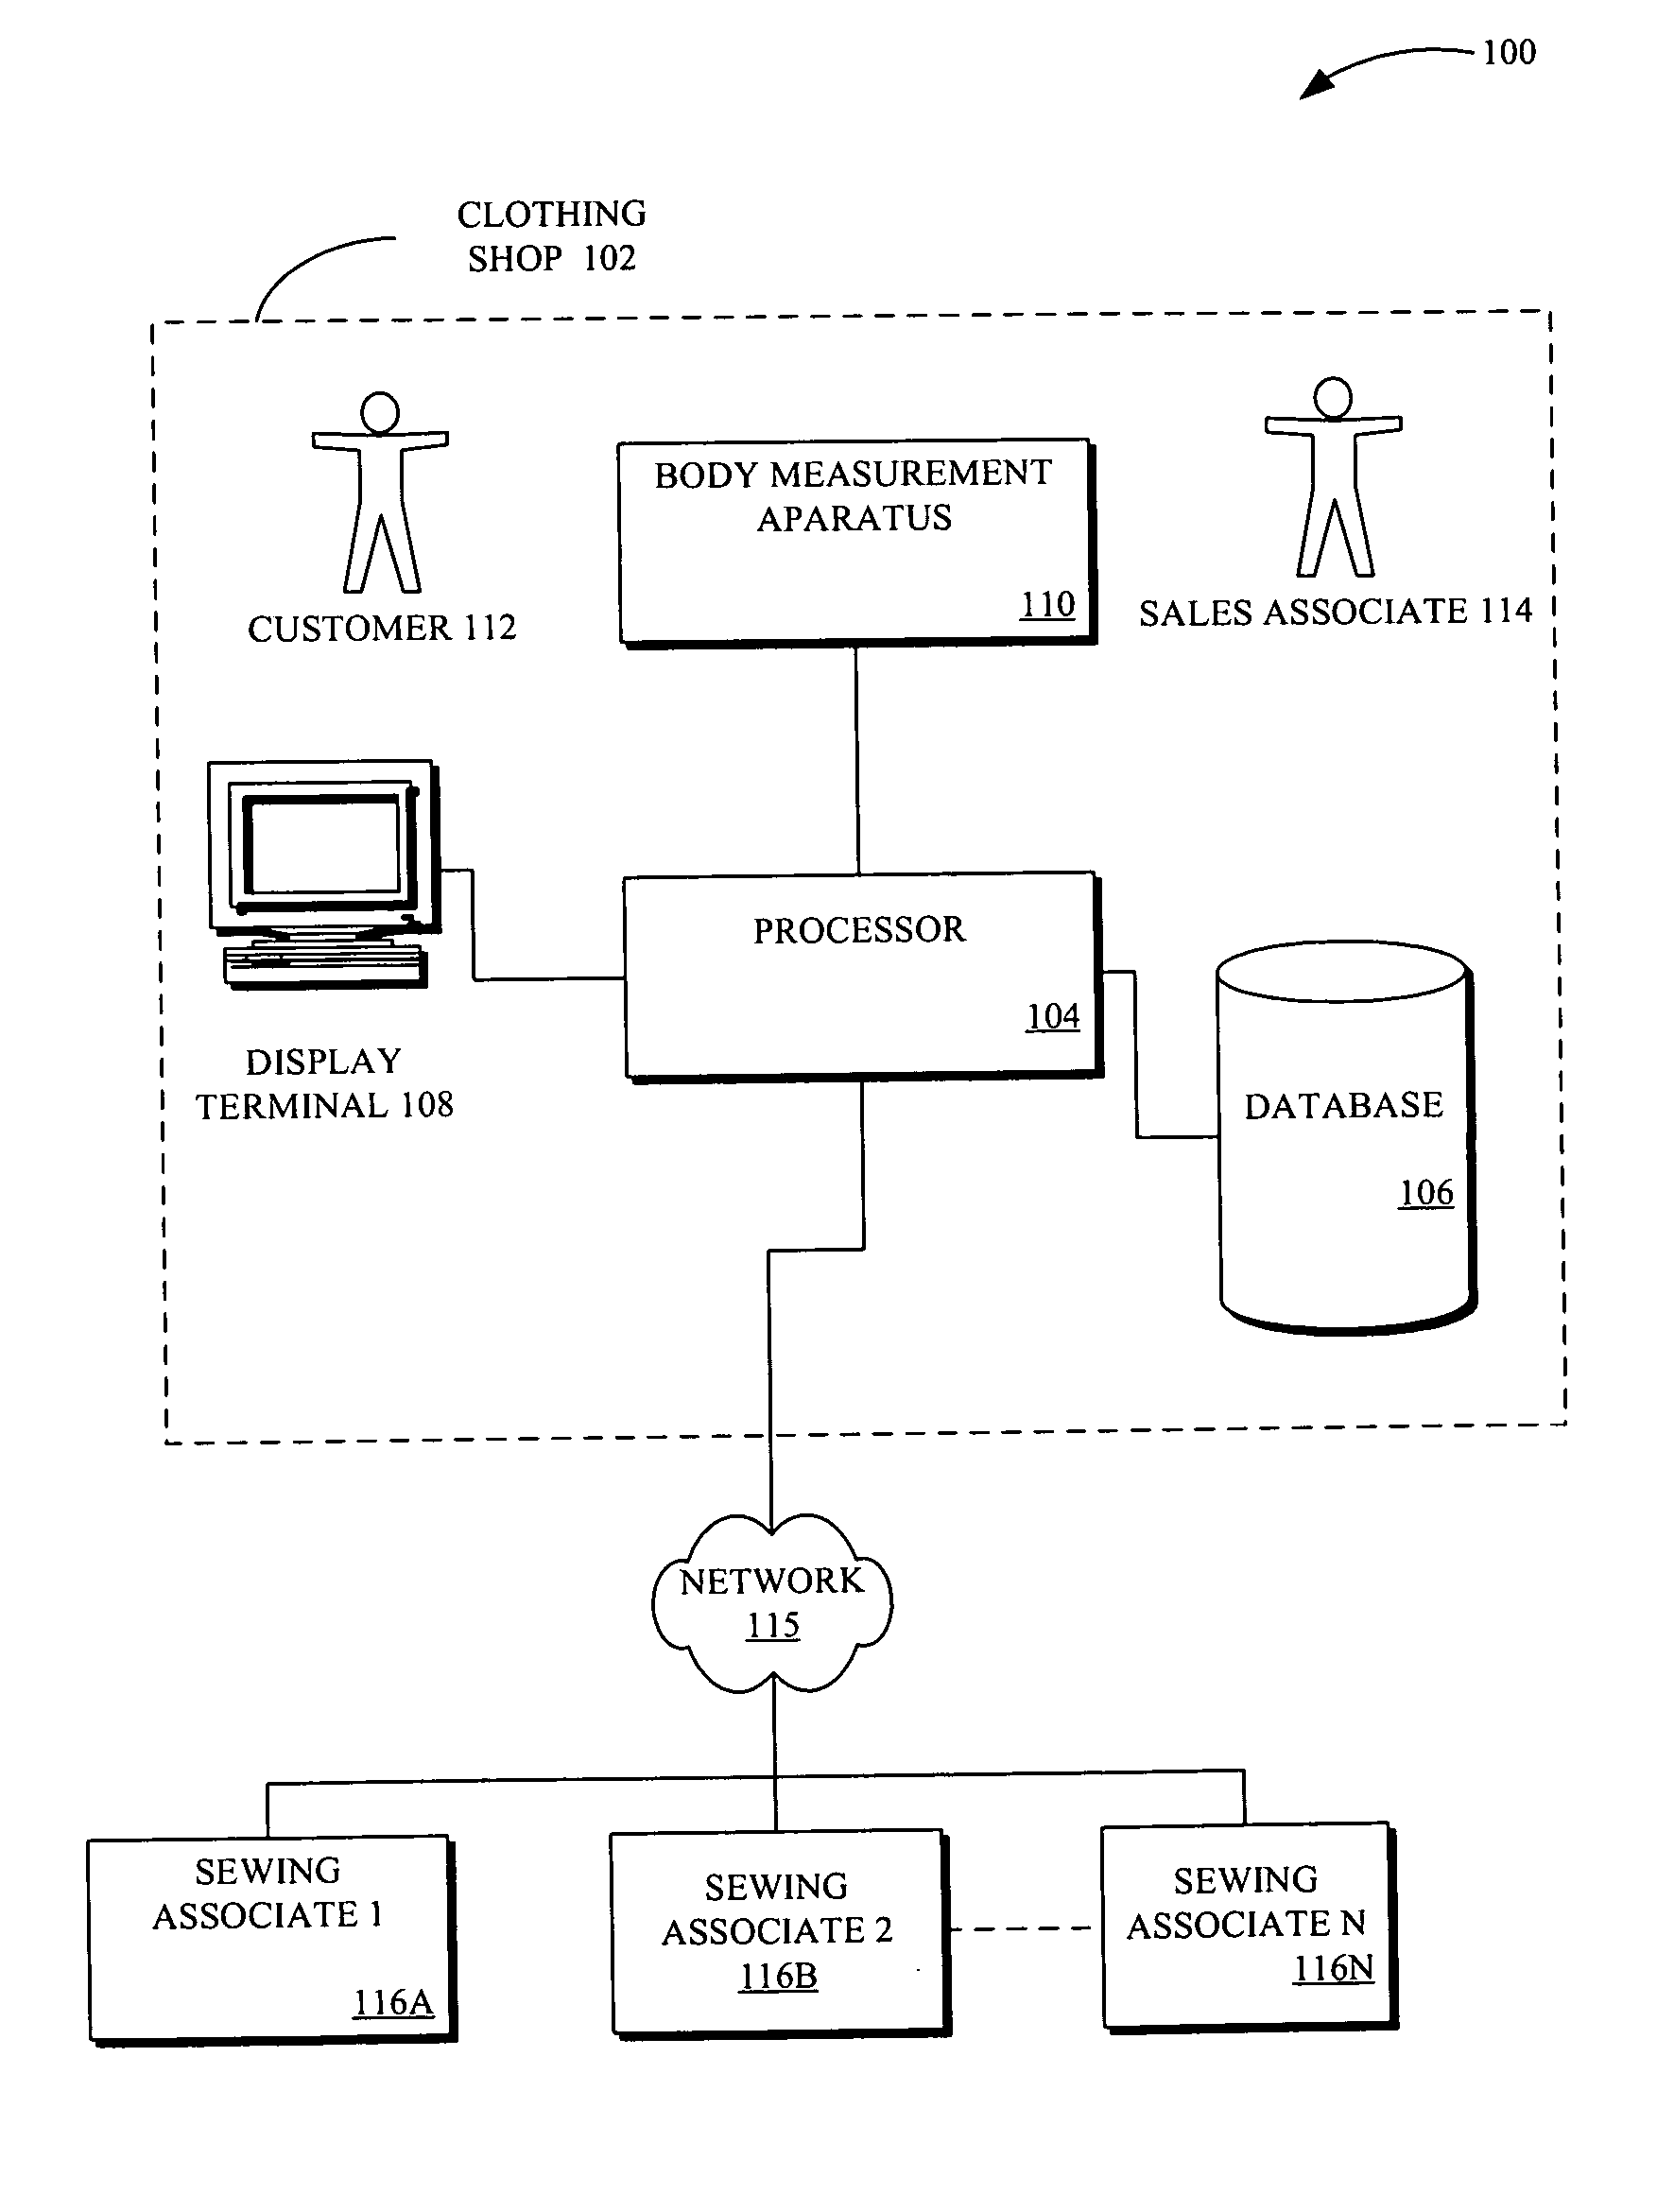 Methods and systems for coordinating customized manufacturing of consumer products